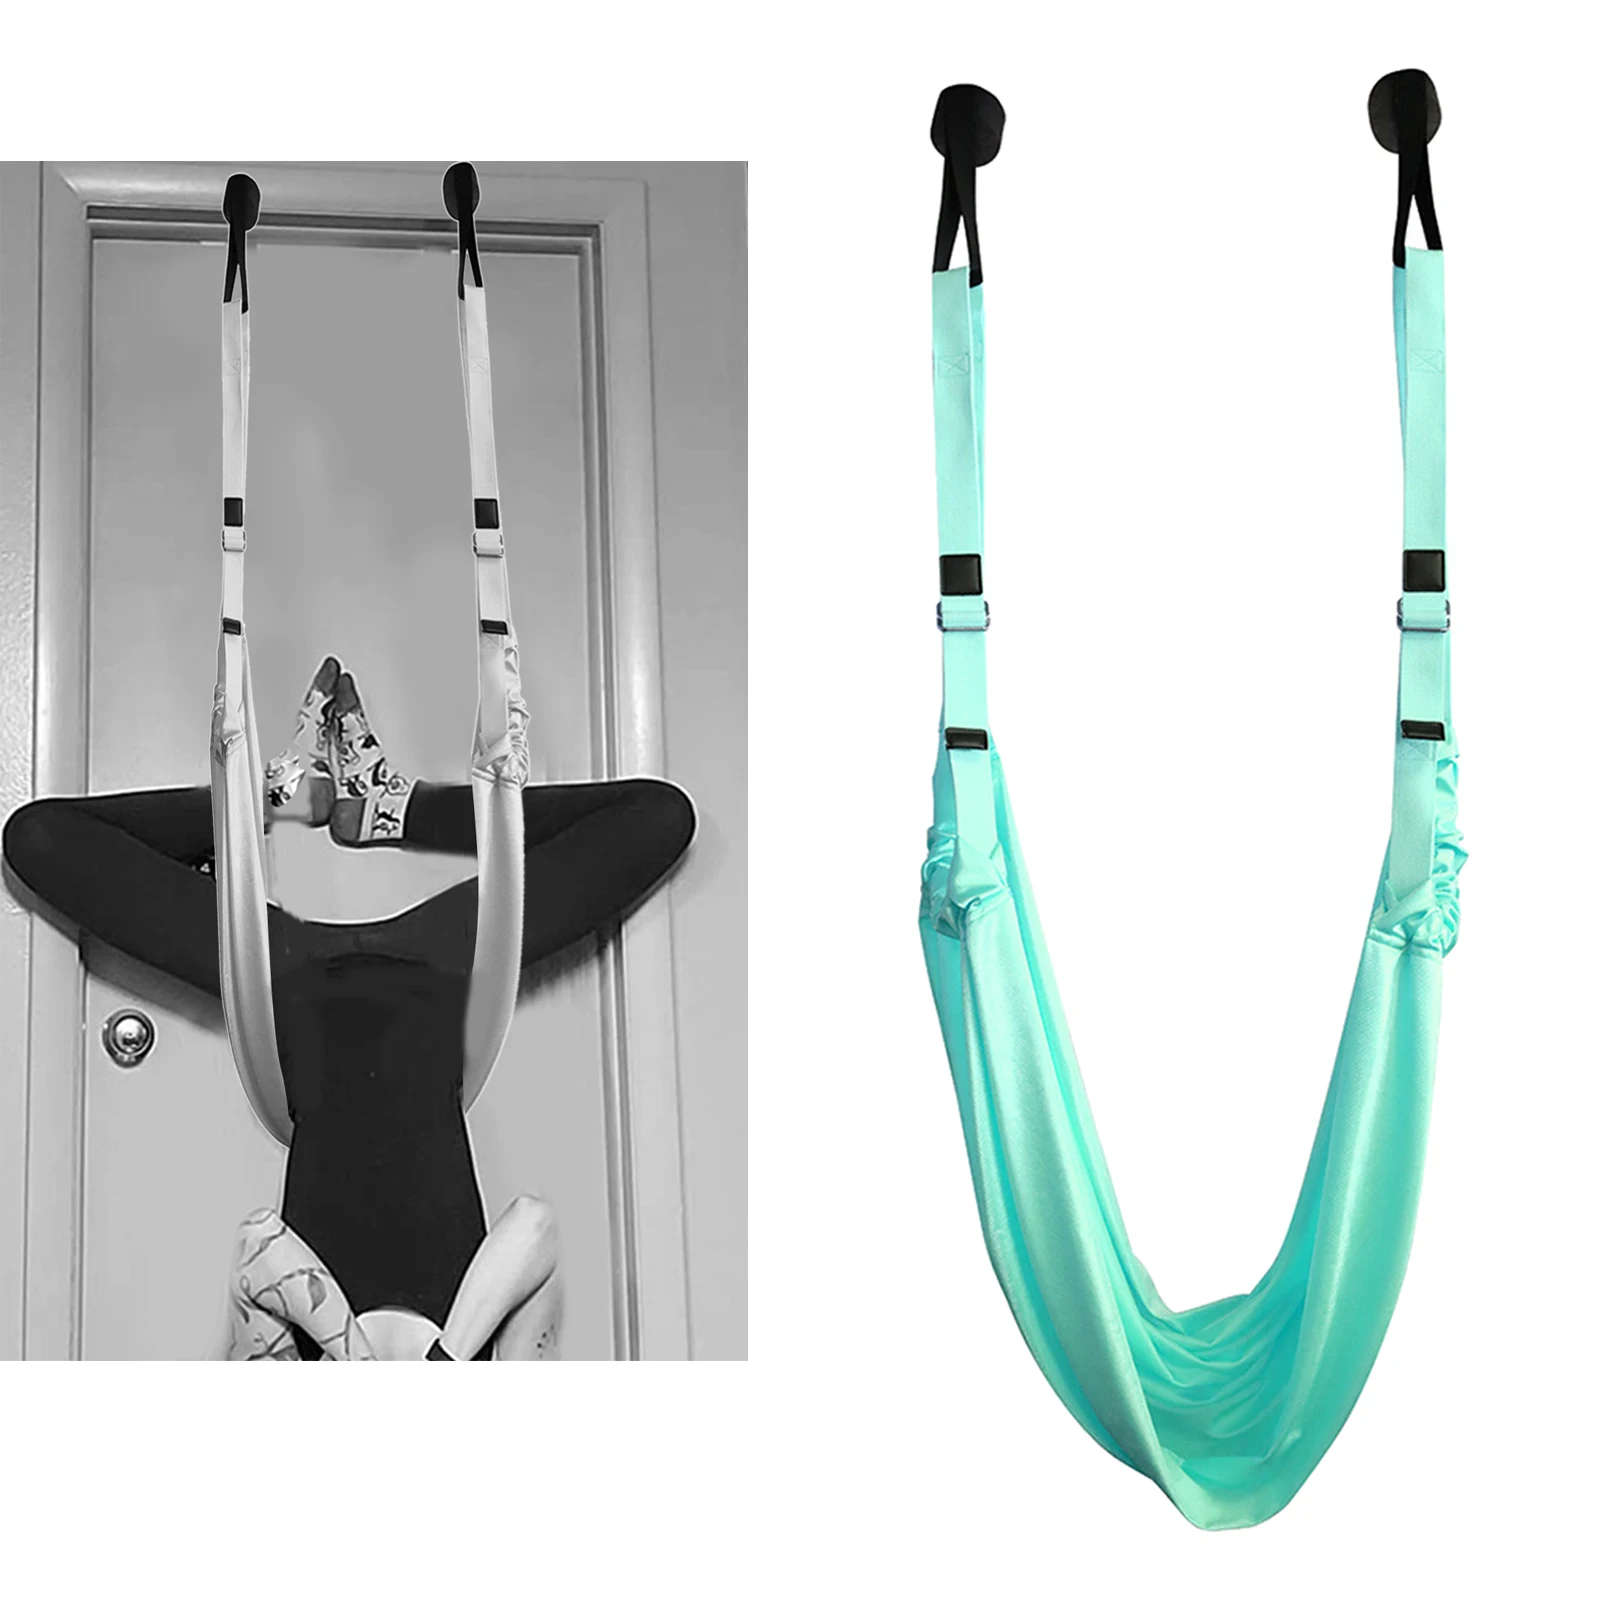 Aerial Yoga Rope Stretch The Leg Splits Practic Elastic Stretch Bar and Bends Down To Stretch Yoga Handstand Training Device